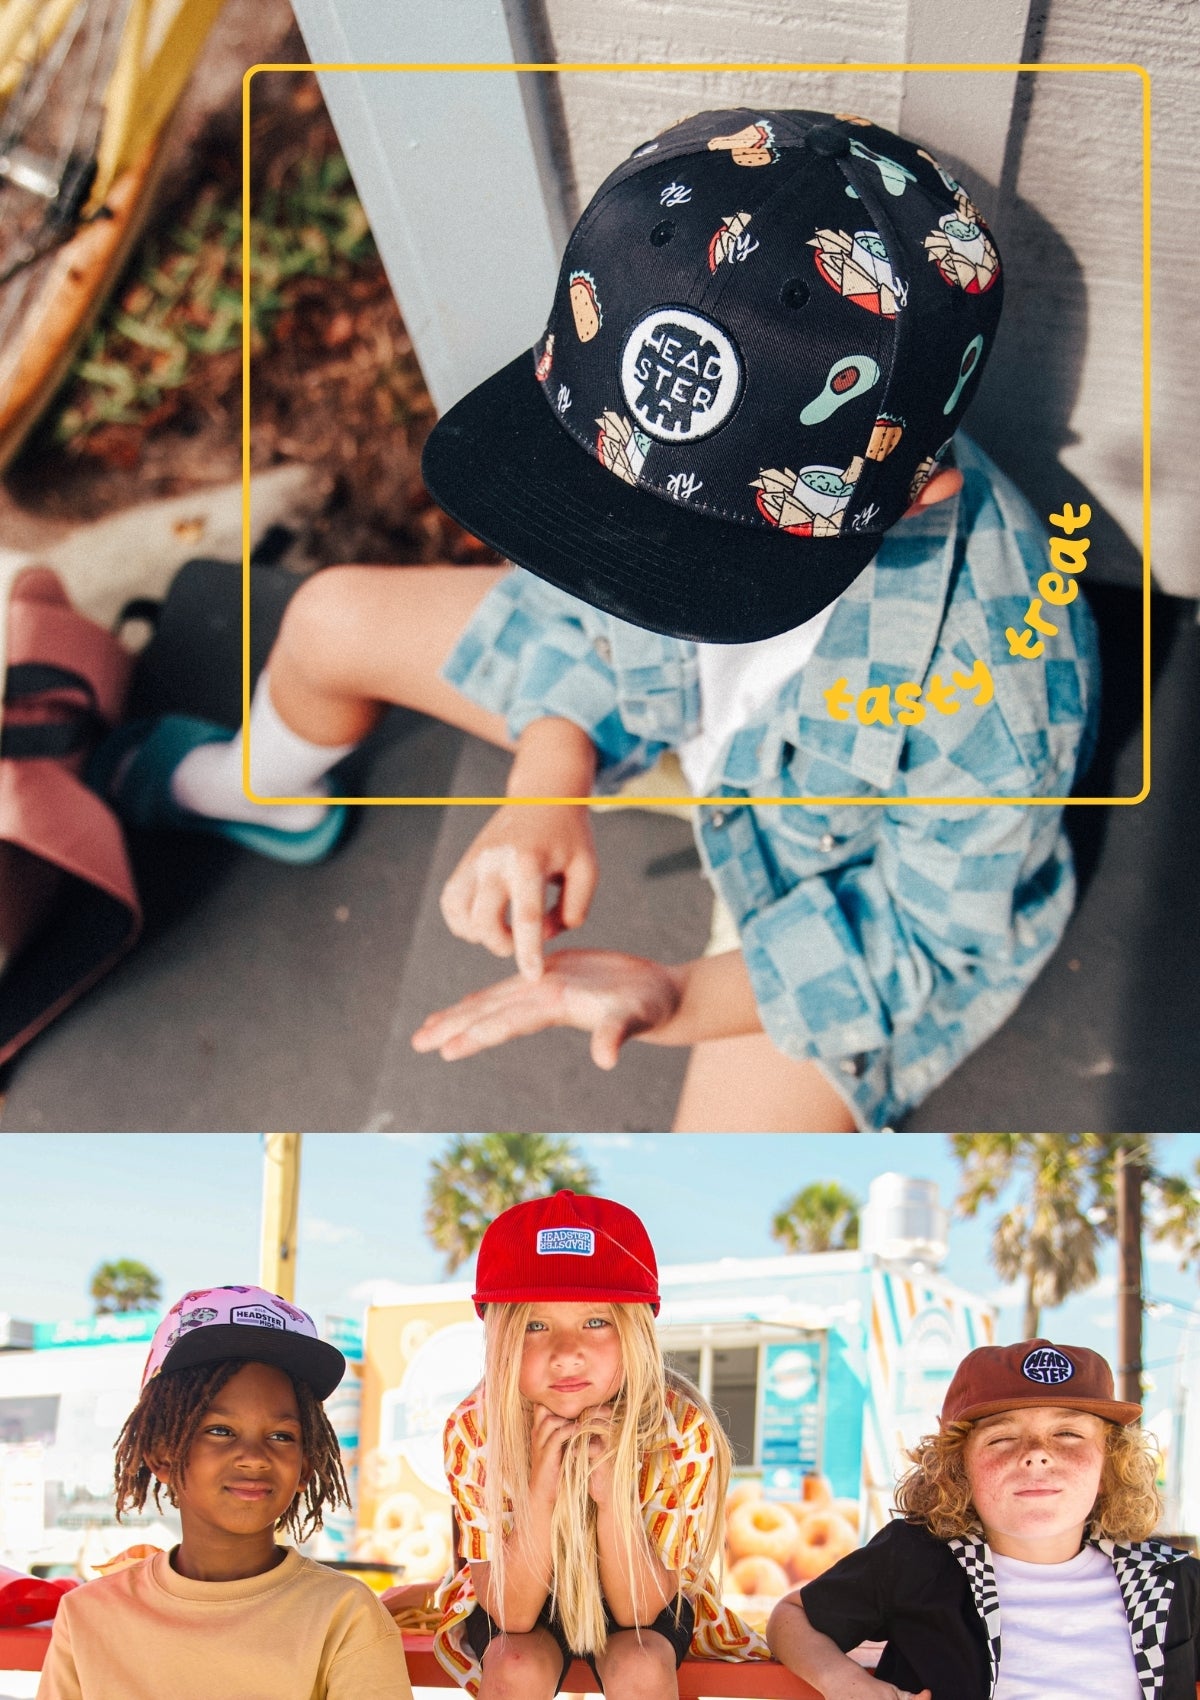 Kids and Baby Hats, Girls and Boys SnapBack